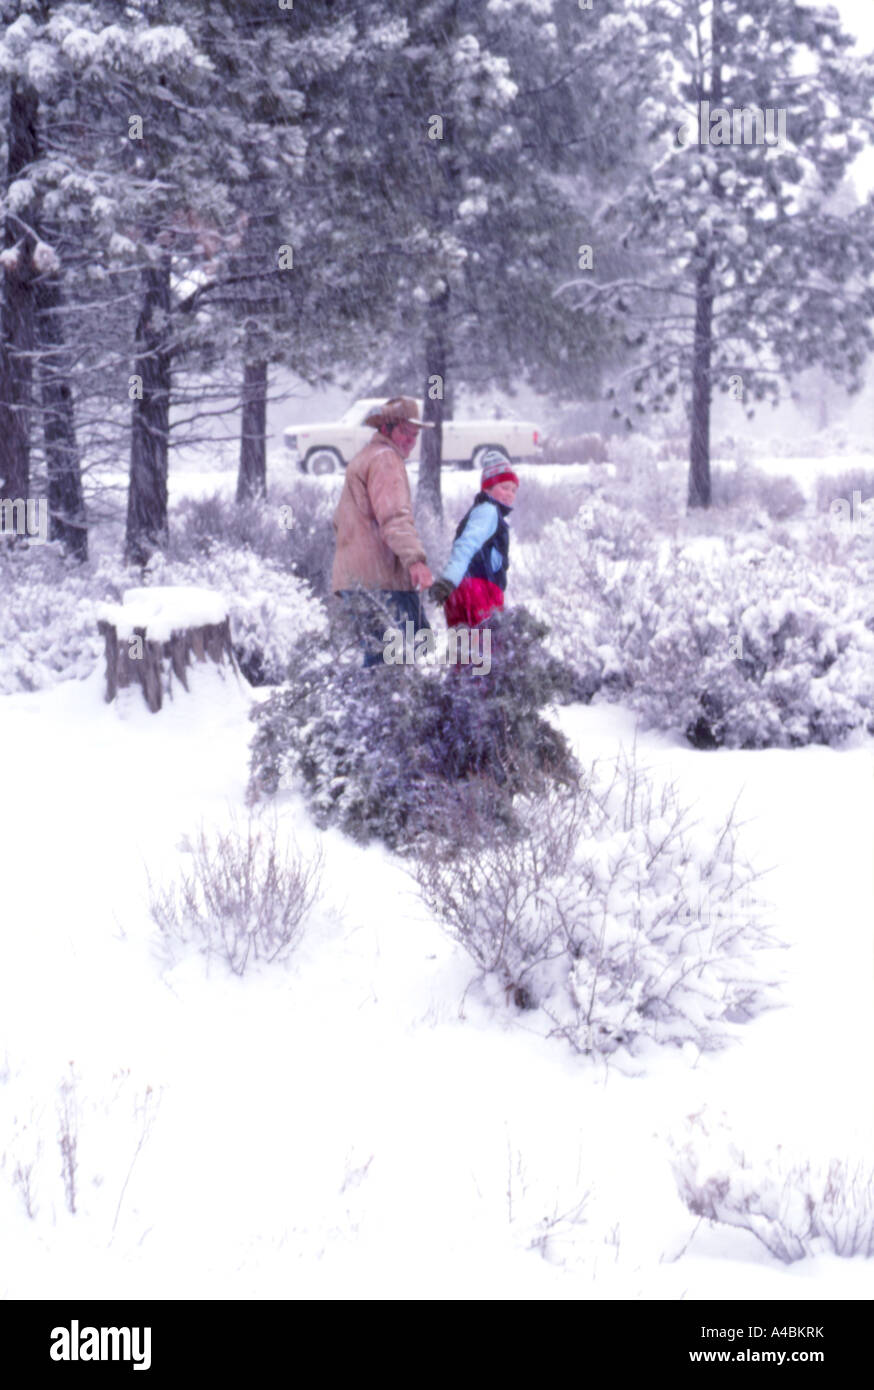 30,651.26100 Father & Son gathering a Christmas tree in the middle of a snowfall snowstorm, as a blanket of snow covers the ground and trees Stock Photo